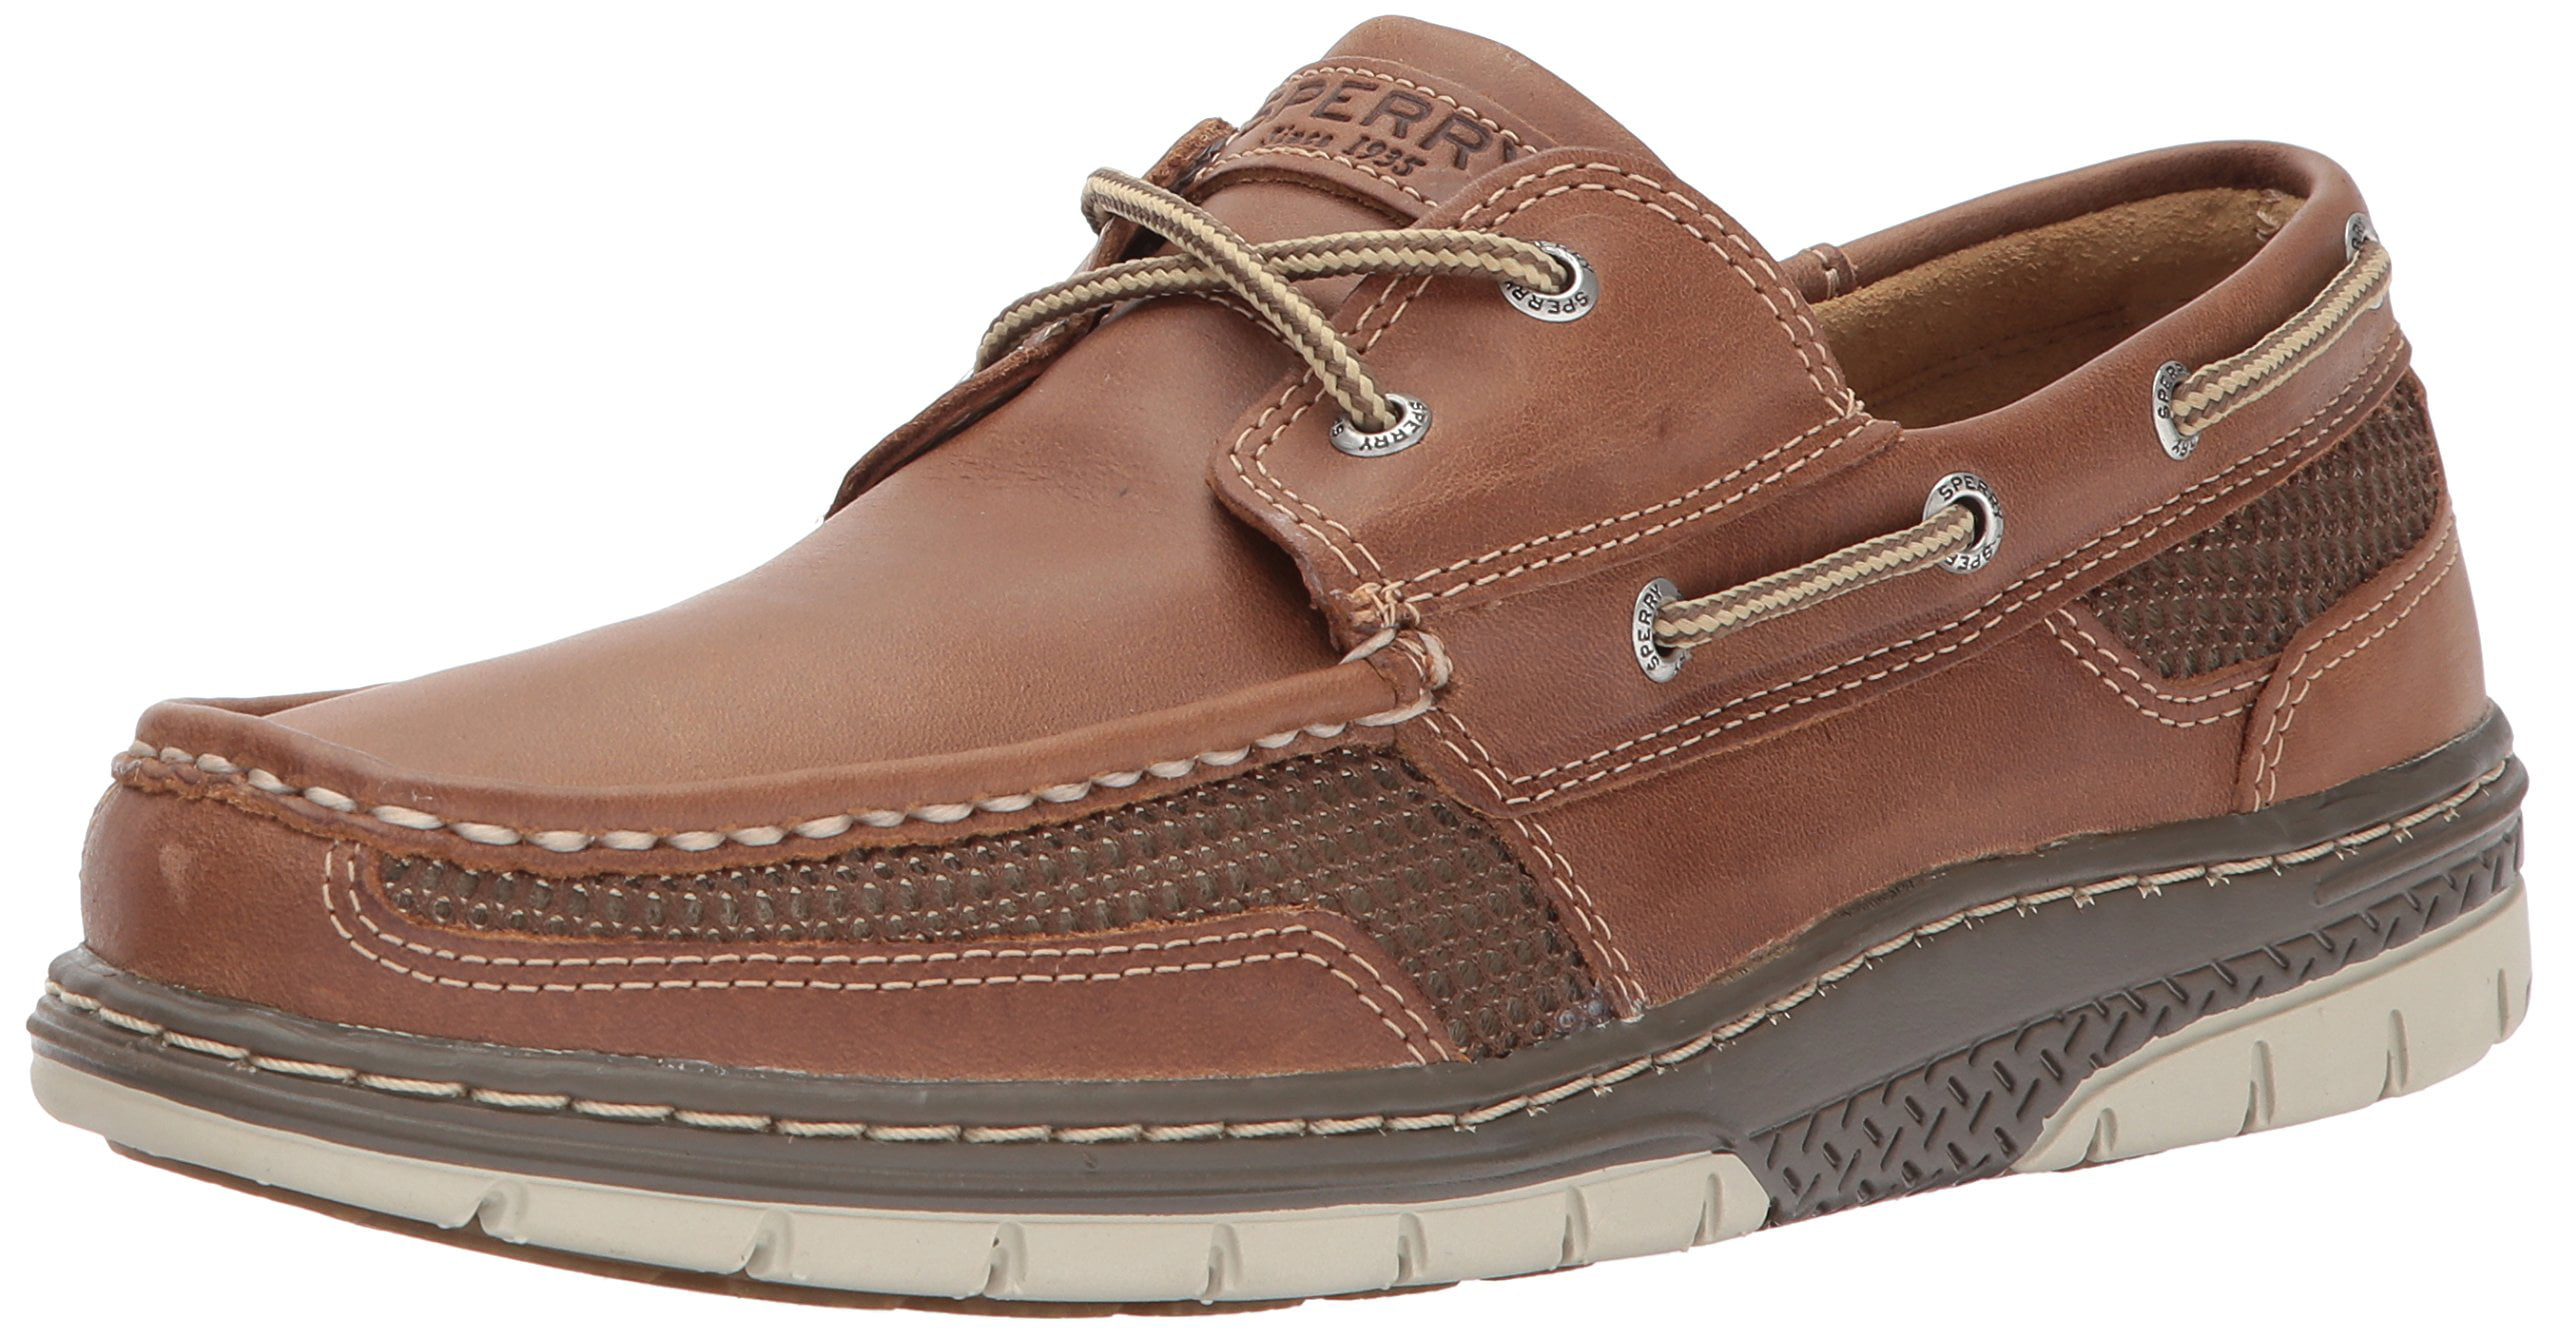 Sperry - Sperry STS15061: Top Sider Tarpon Ultralite Mens Tan Boat ...